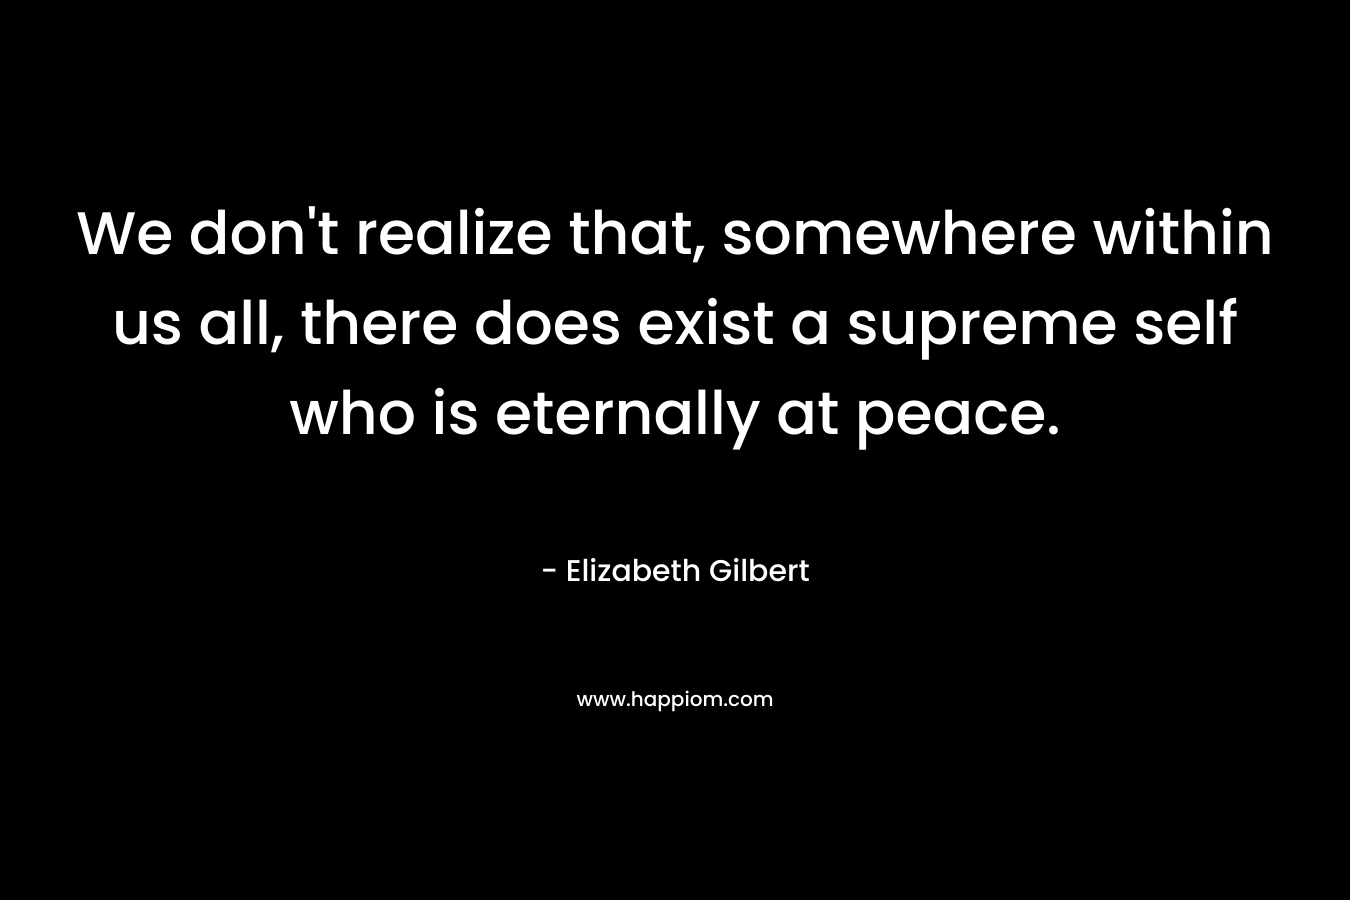 We don’t realize that, somewhere within us all, there does exist a supreme self who is eternally at peace. – Elizabeth Gilbert